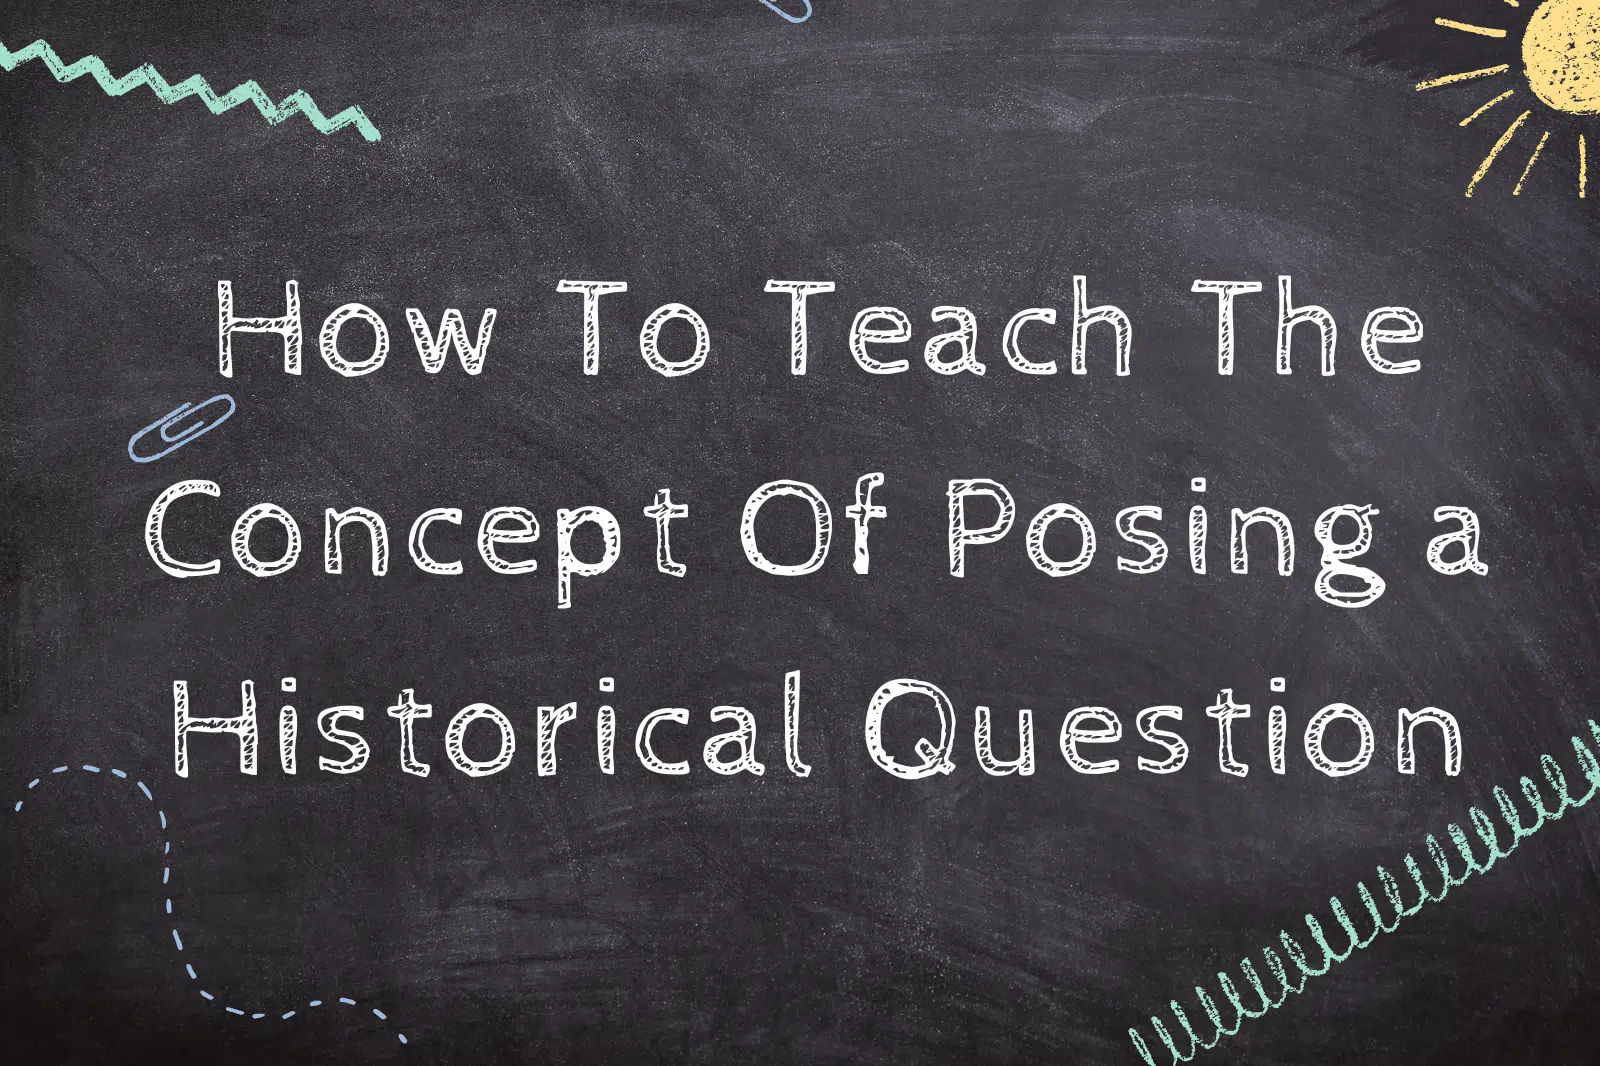 How To Teach The Concept Of Posing a Historical Question